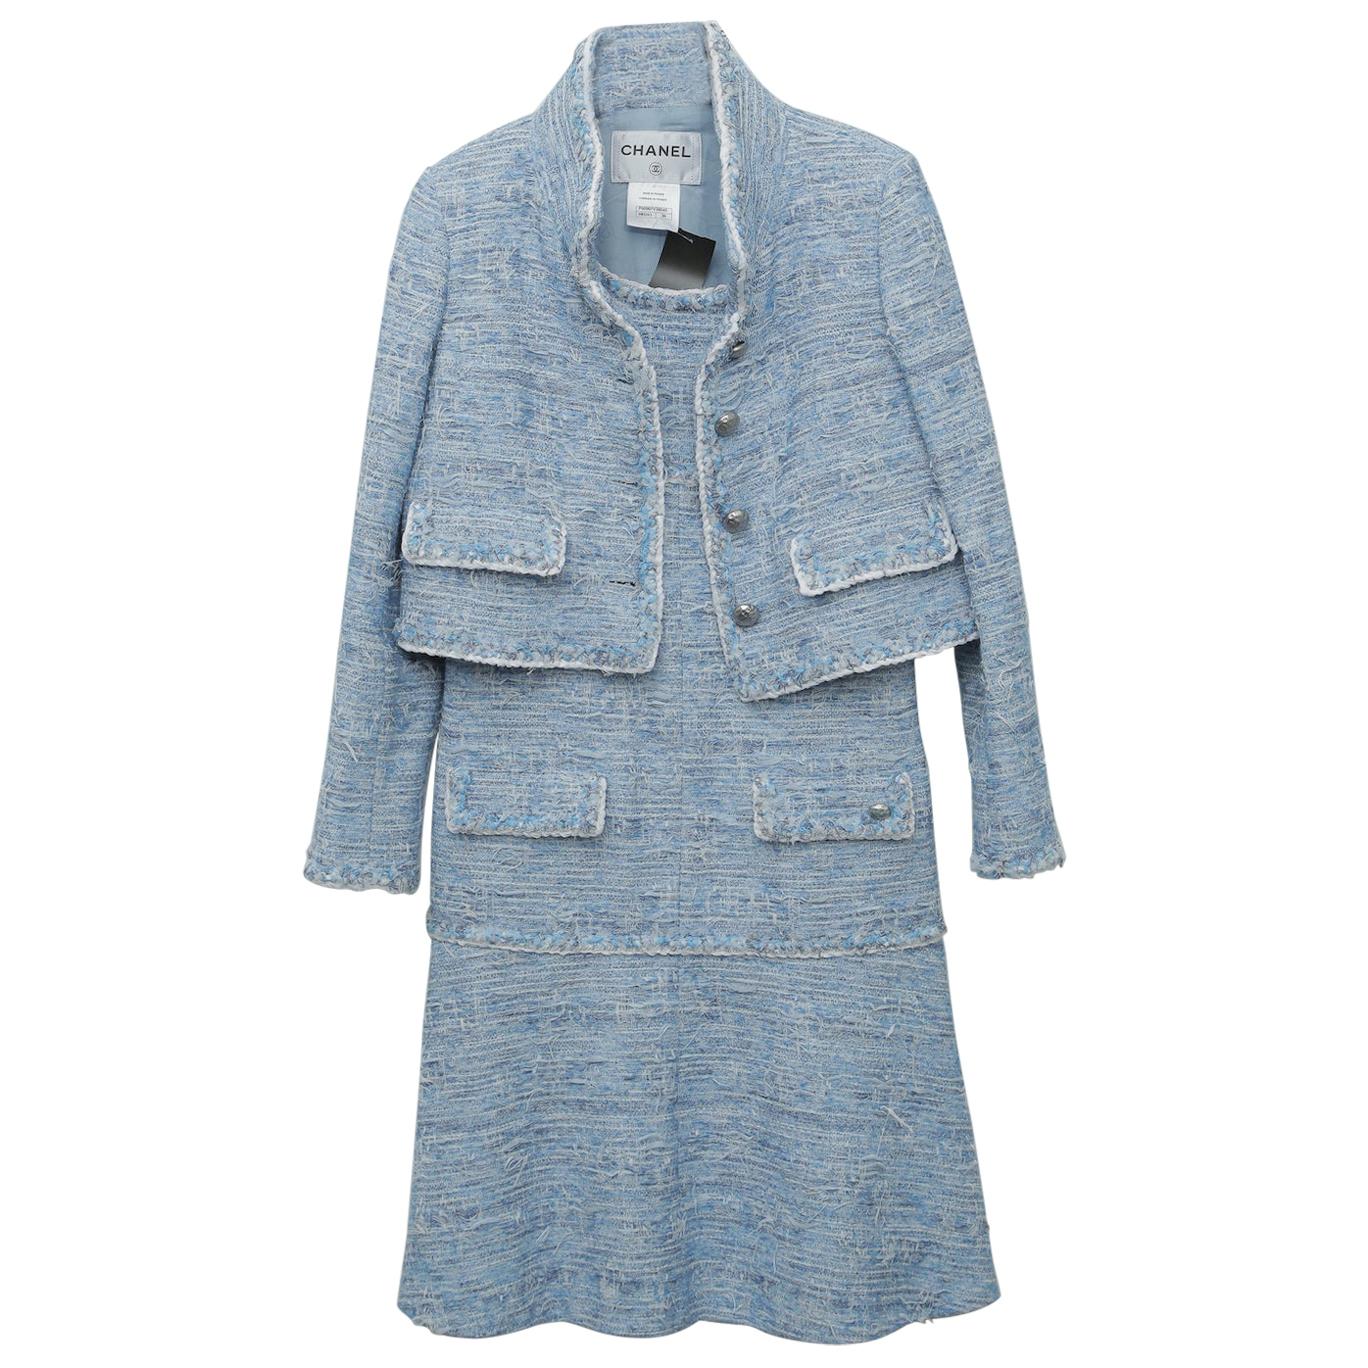 Chanel Blue Baby Tweed with Matching Jacket Cocktail Dress